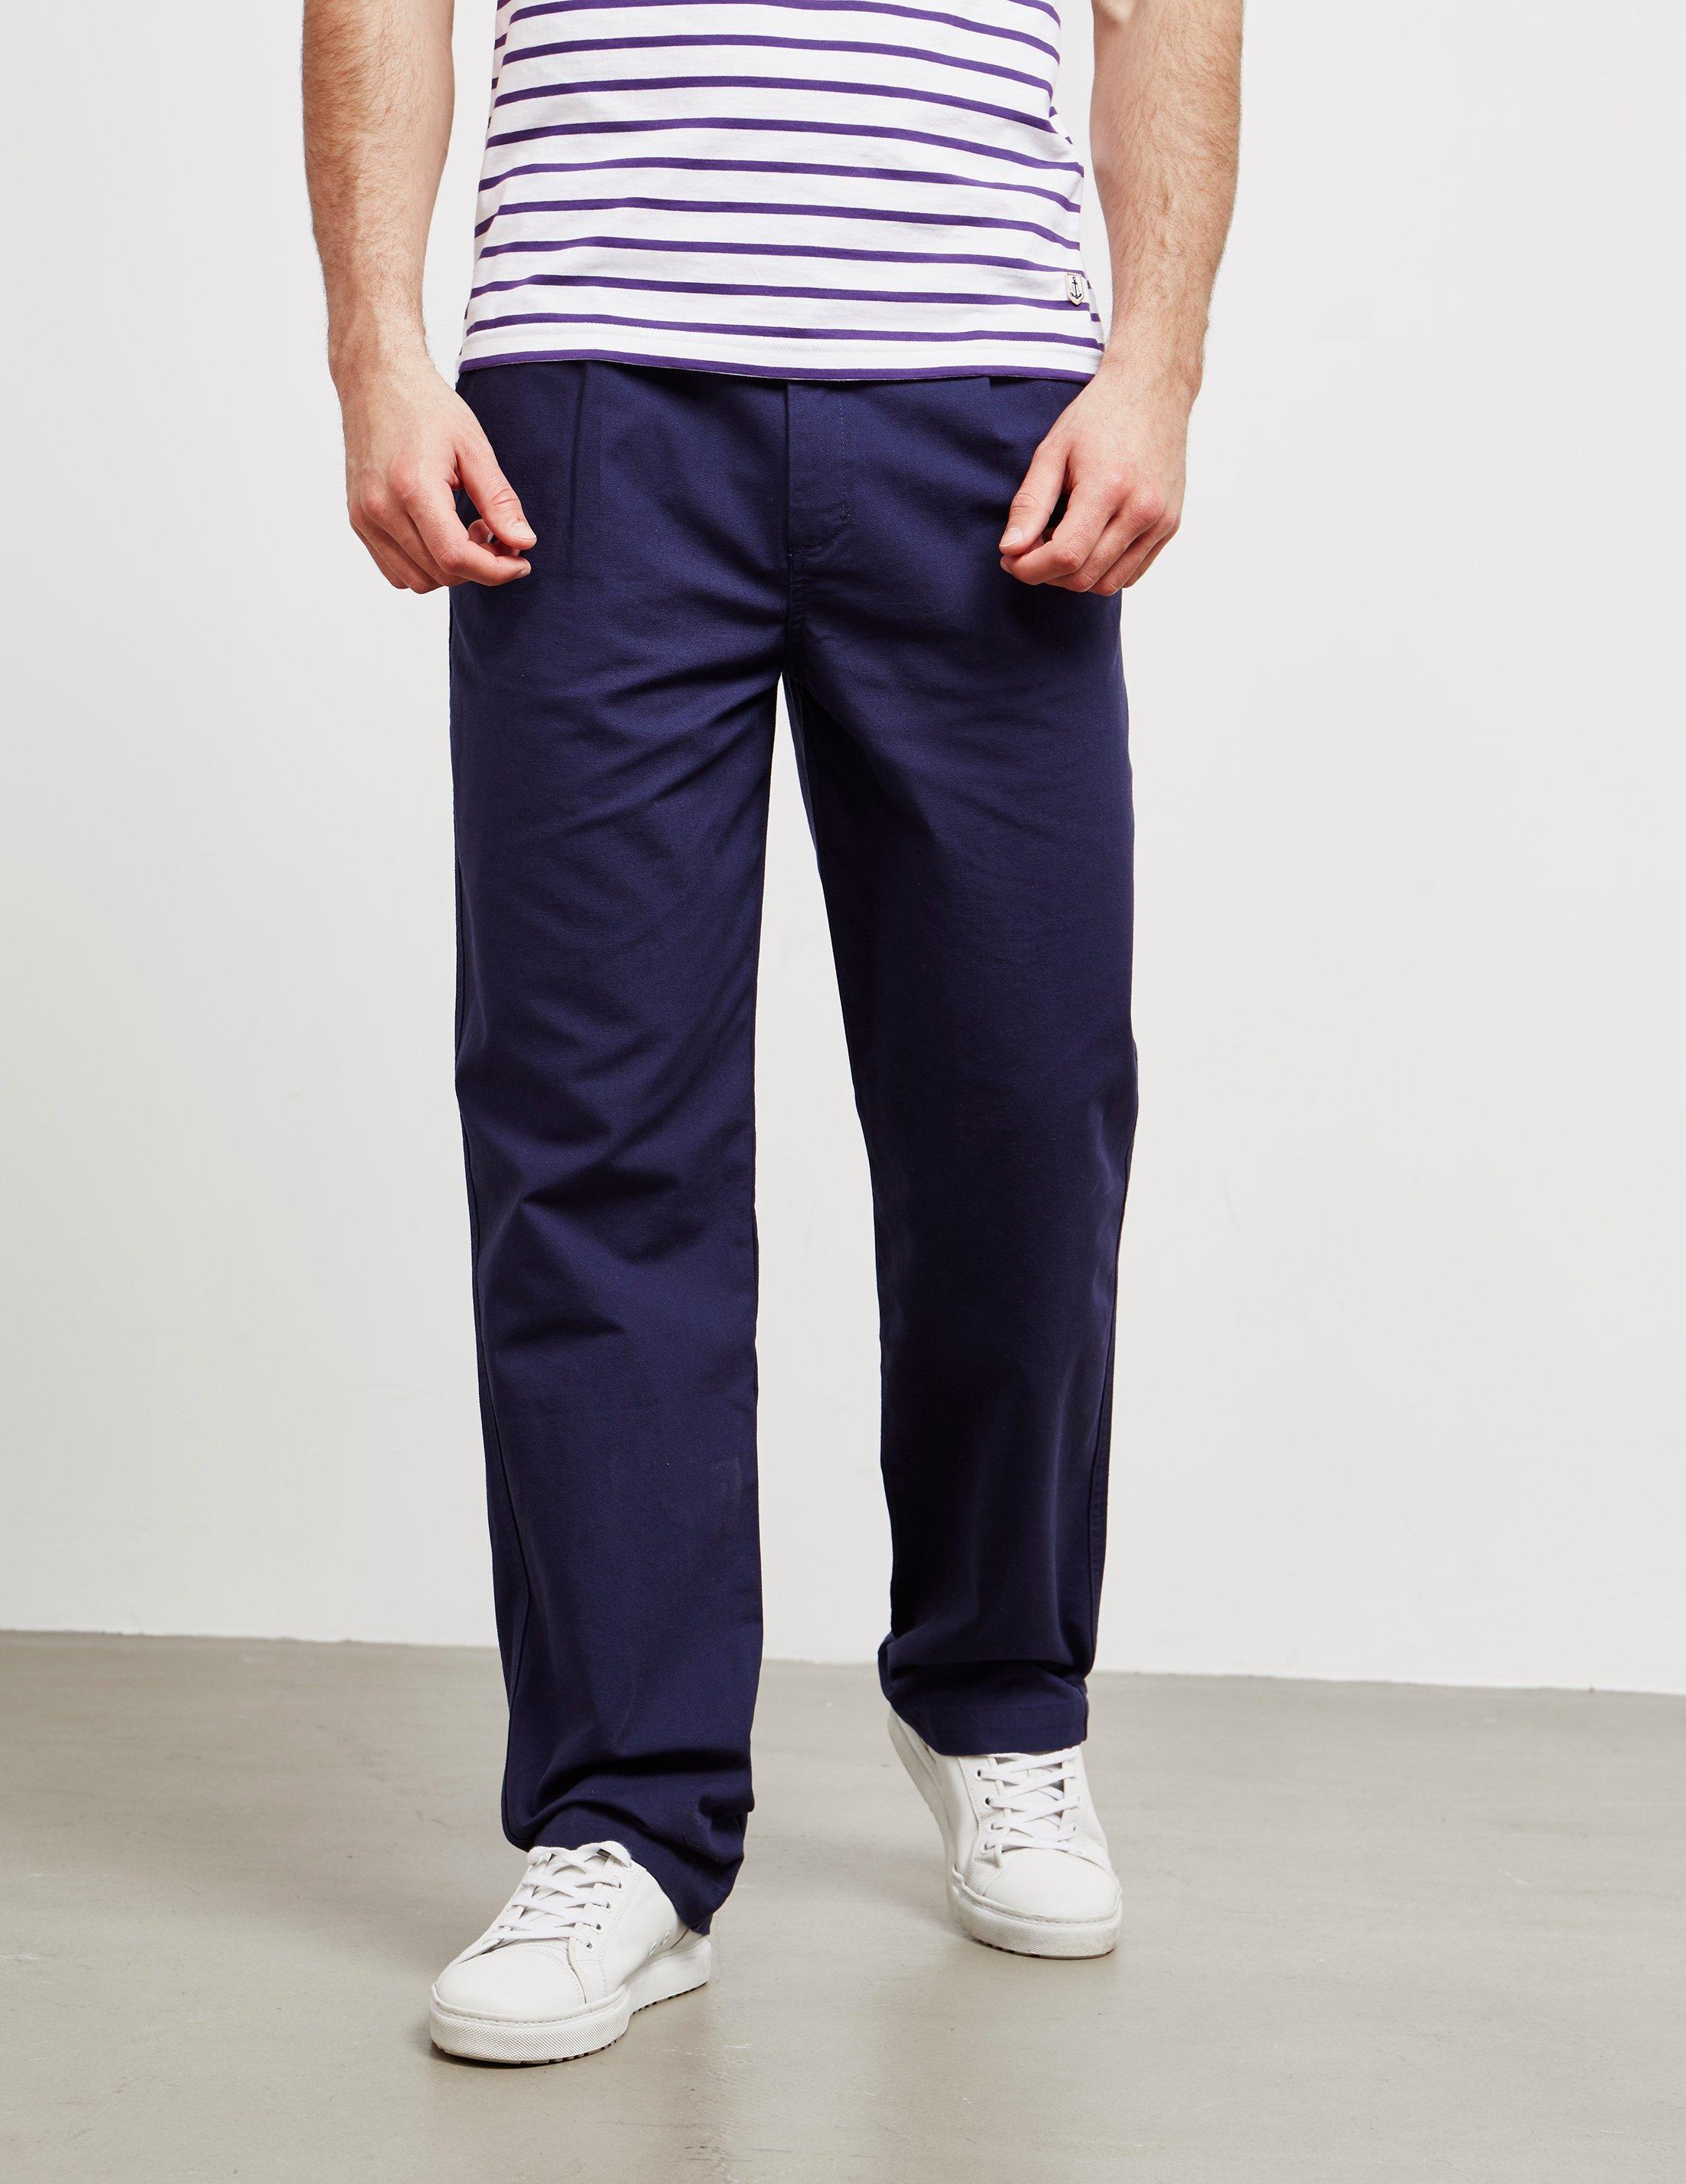 Armor Lux Heritage Trousers Navy Blue for Men - Lyst